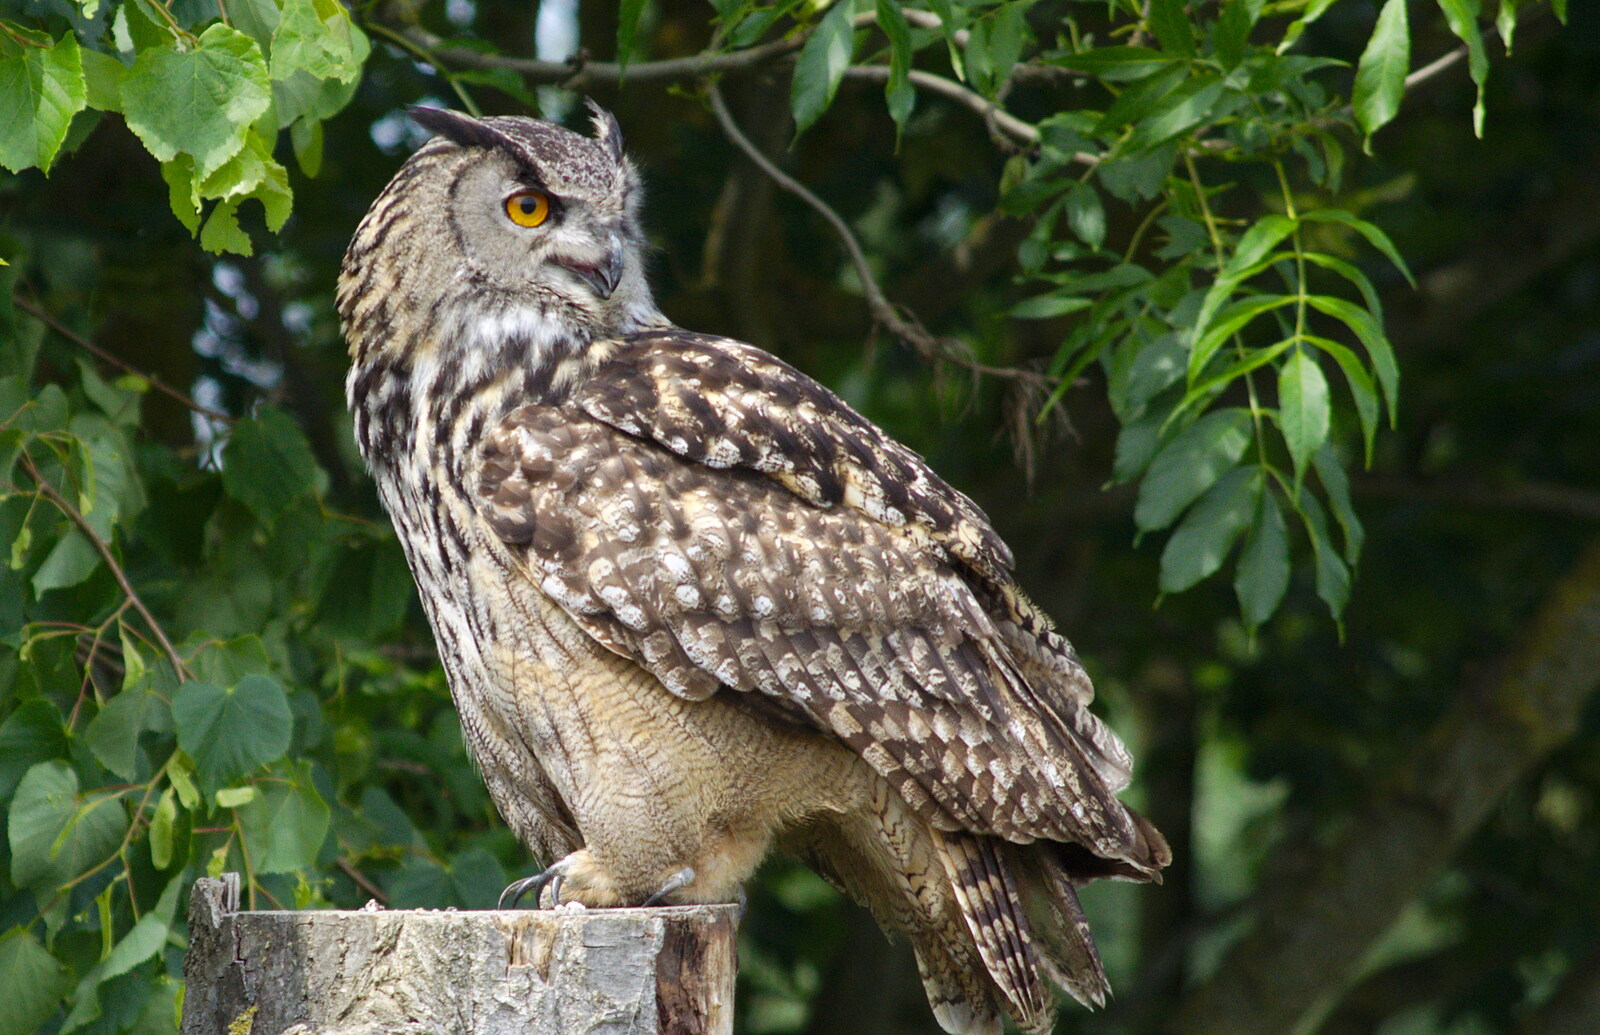 An Eagle Owl from A Birthday Trip to the Zoo, Banham, Norfolk - 26th May 2014